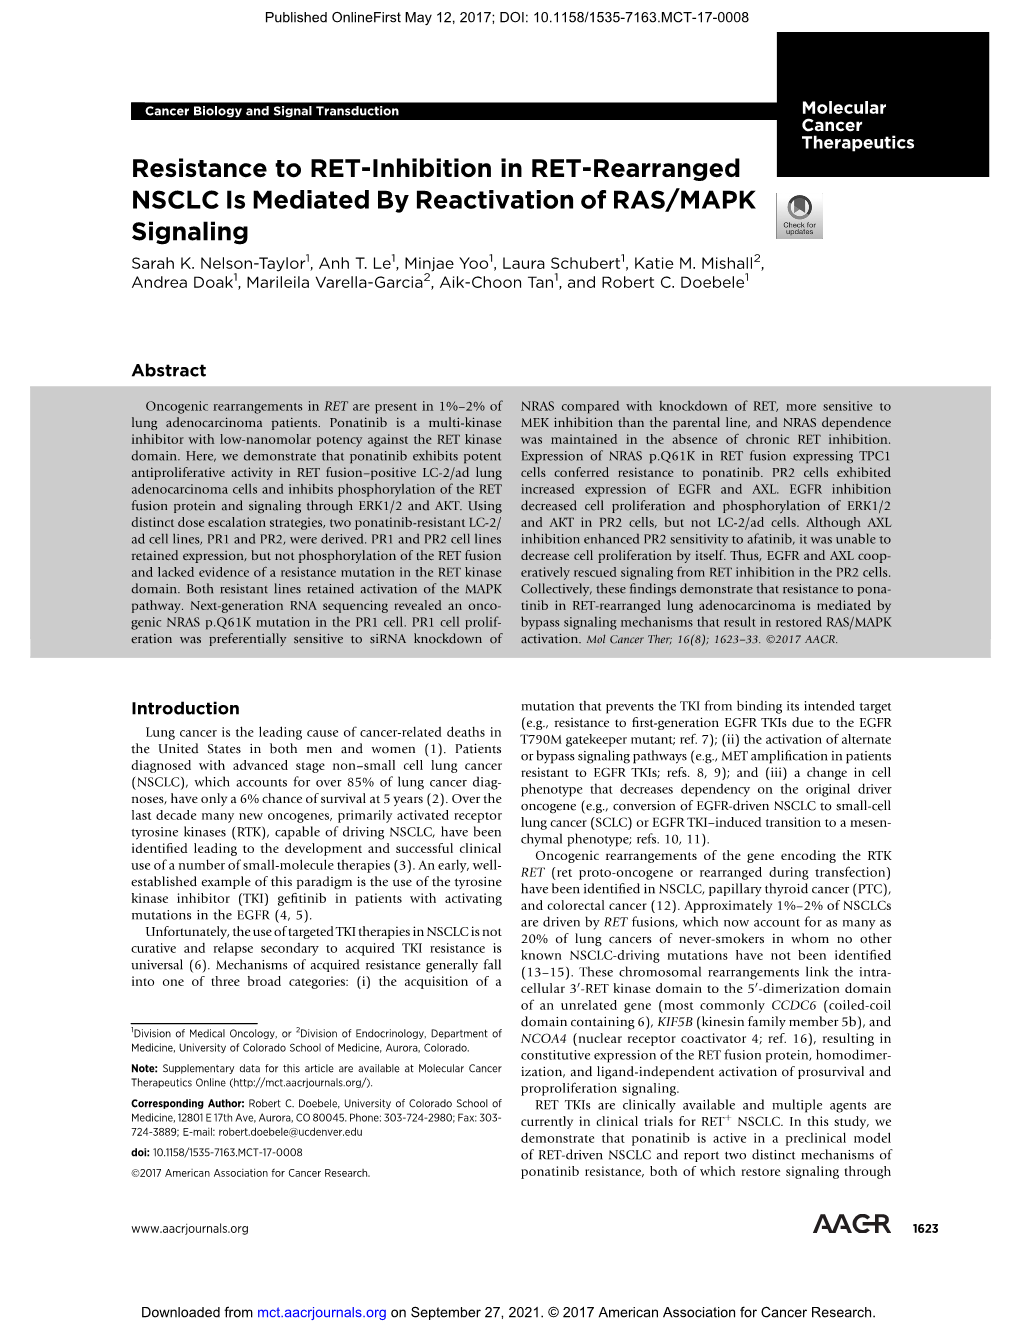 Resistance to RET-Inhibition in RET-Rearranged NSCLC Is Mediated by Reactivation of RAS/MAPK Signaling Sarah K